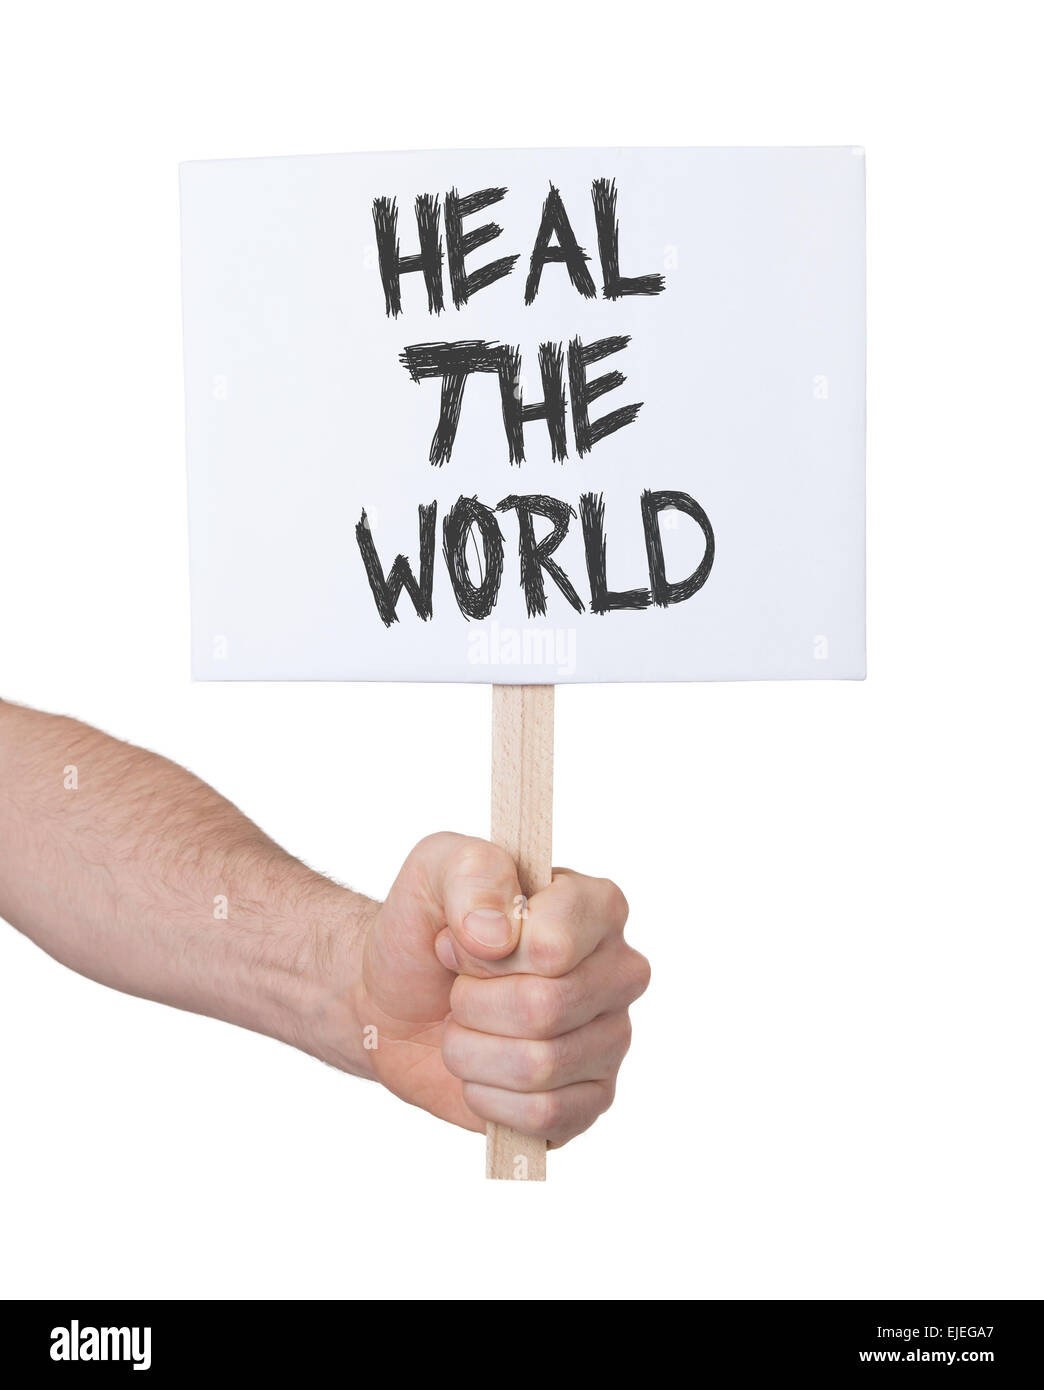 Hand holding sign, isolated on white - Heal the world Stock Photo